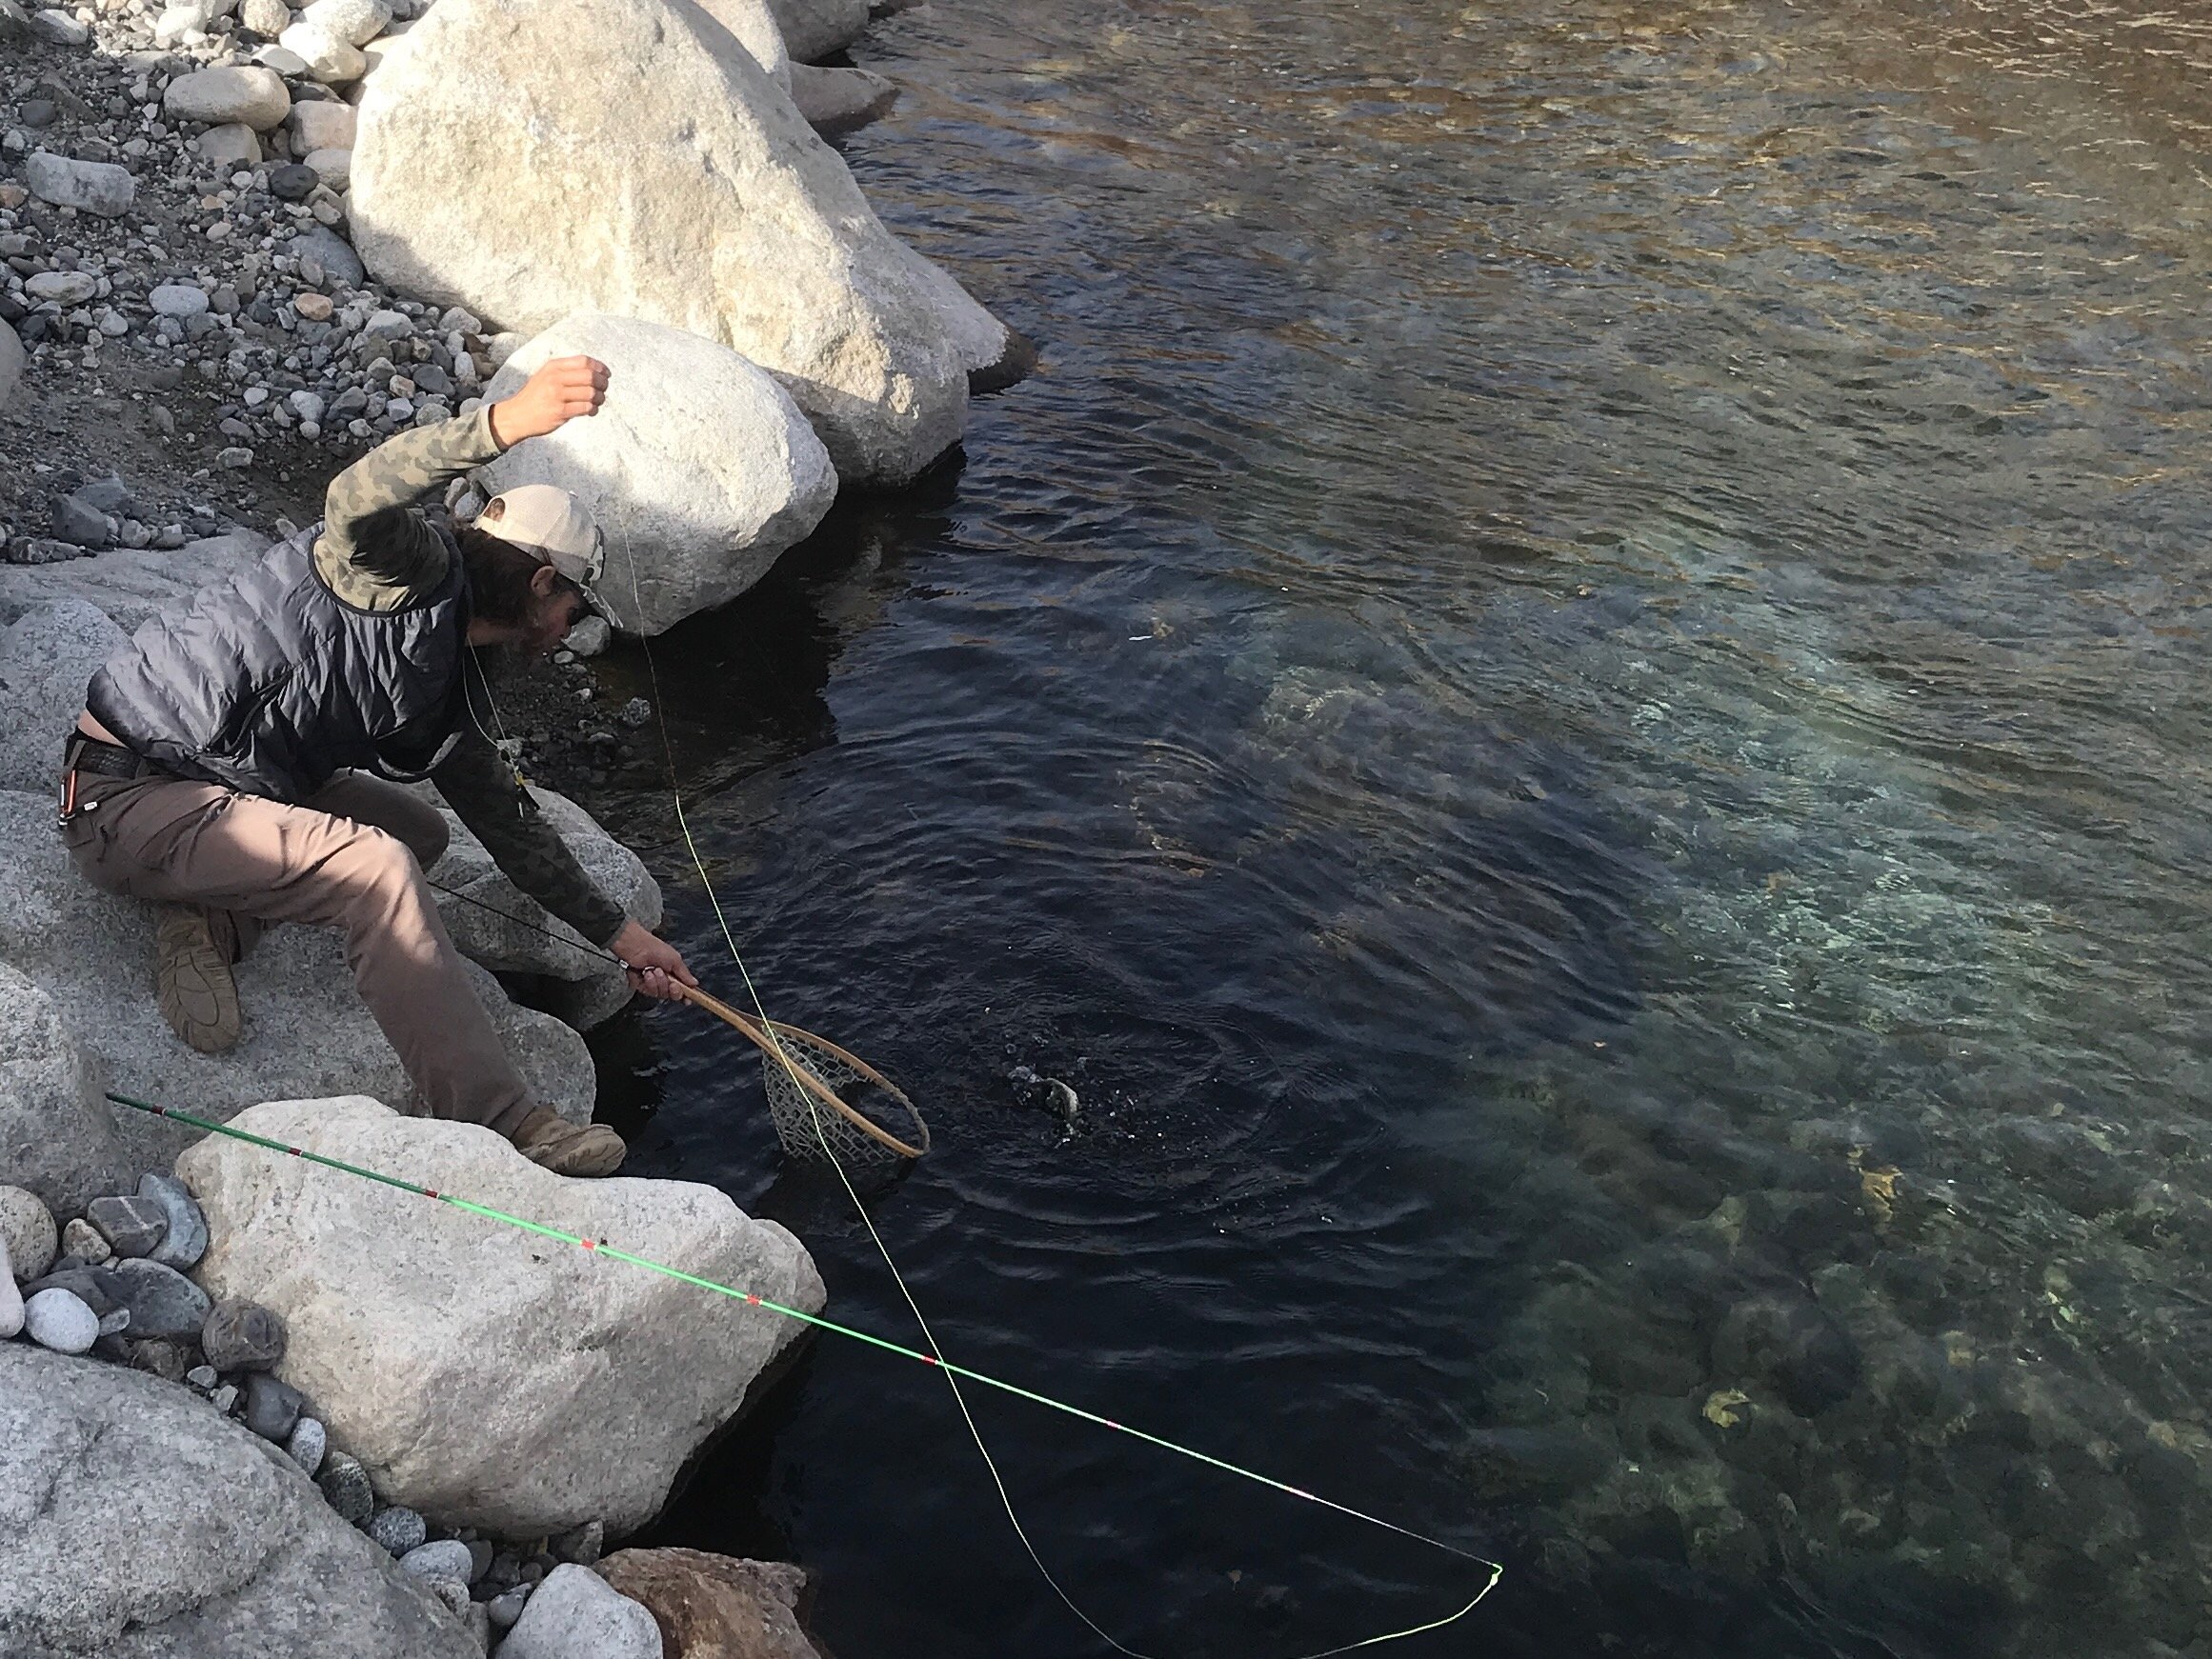 Happy Fishing! Here is this weekend's Big Bend fishing report